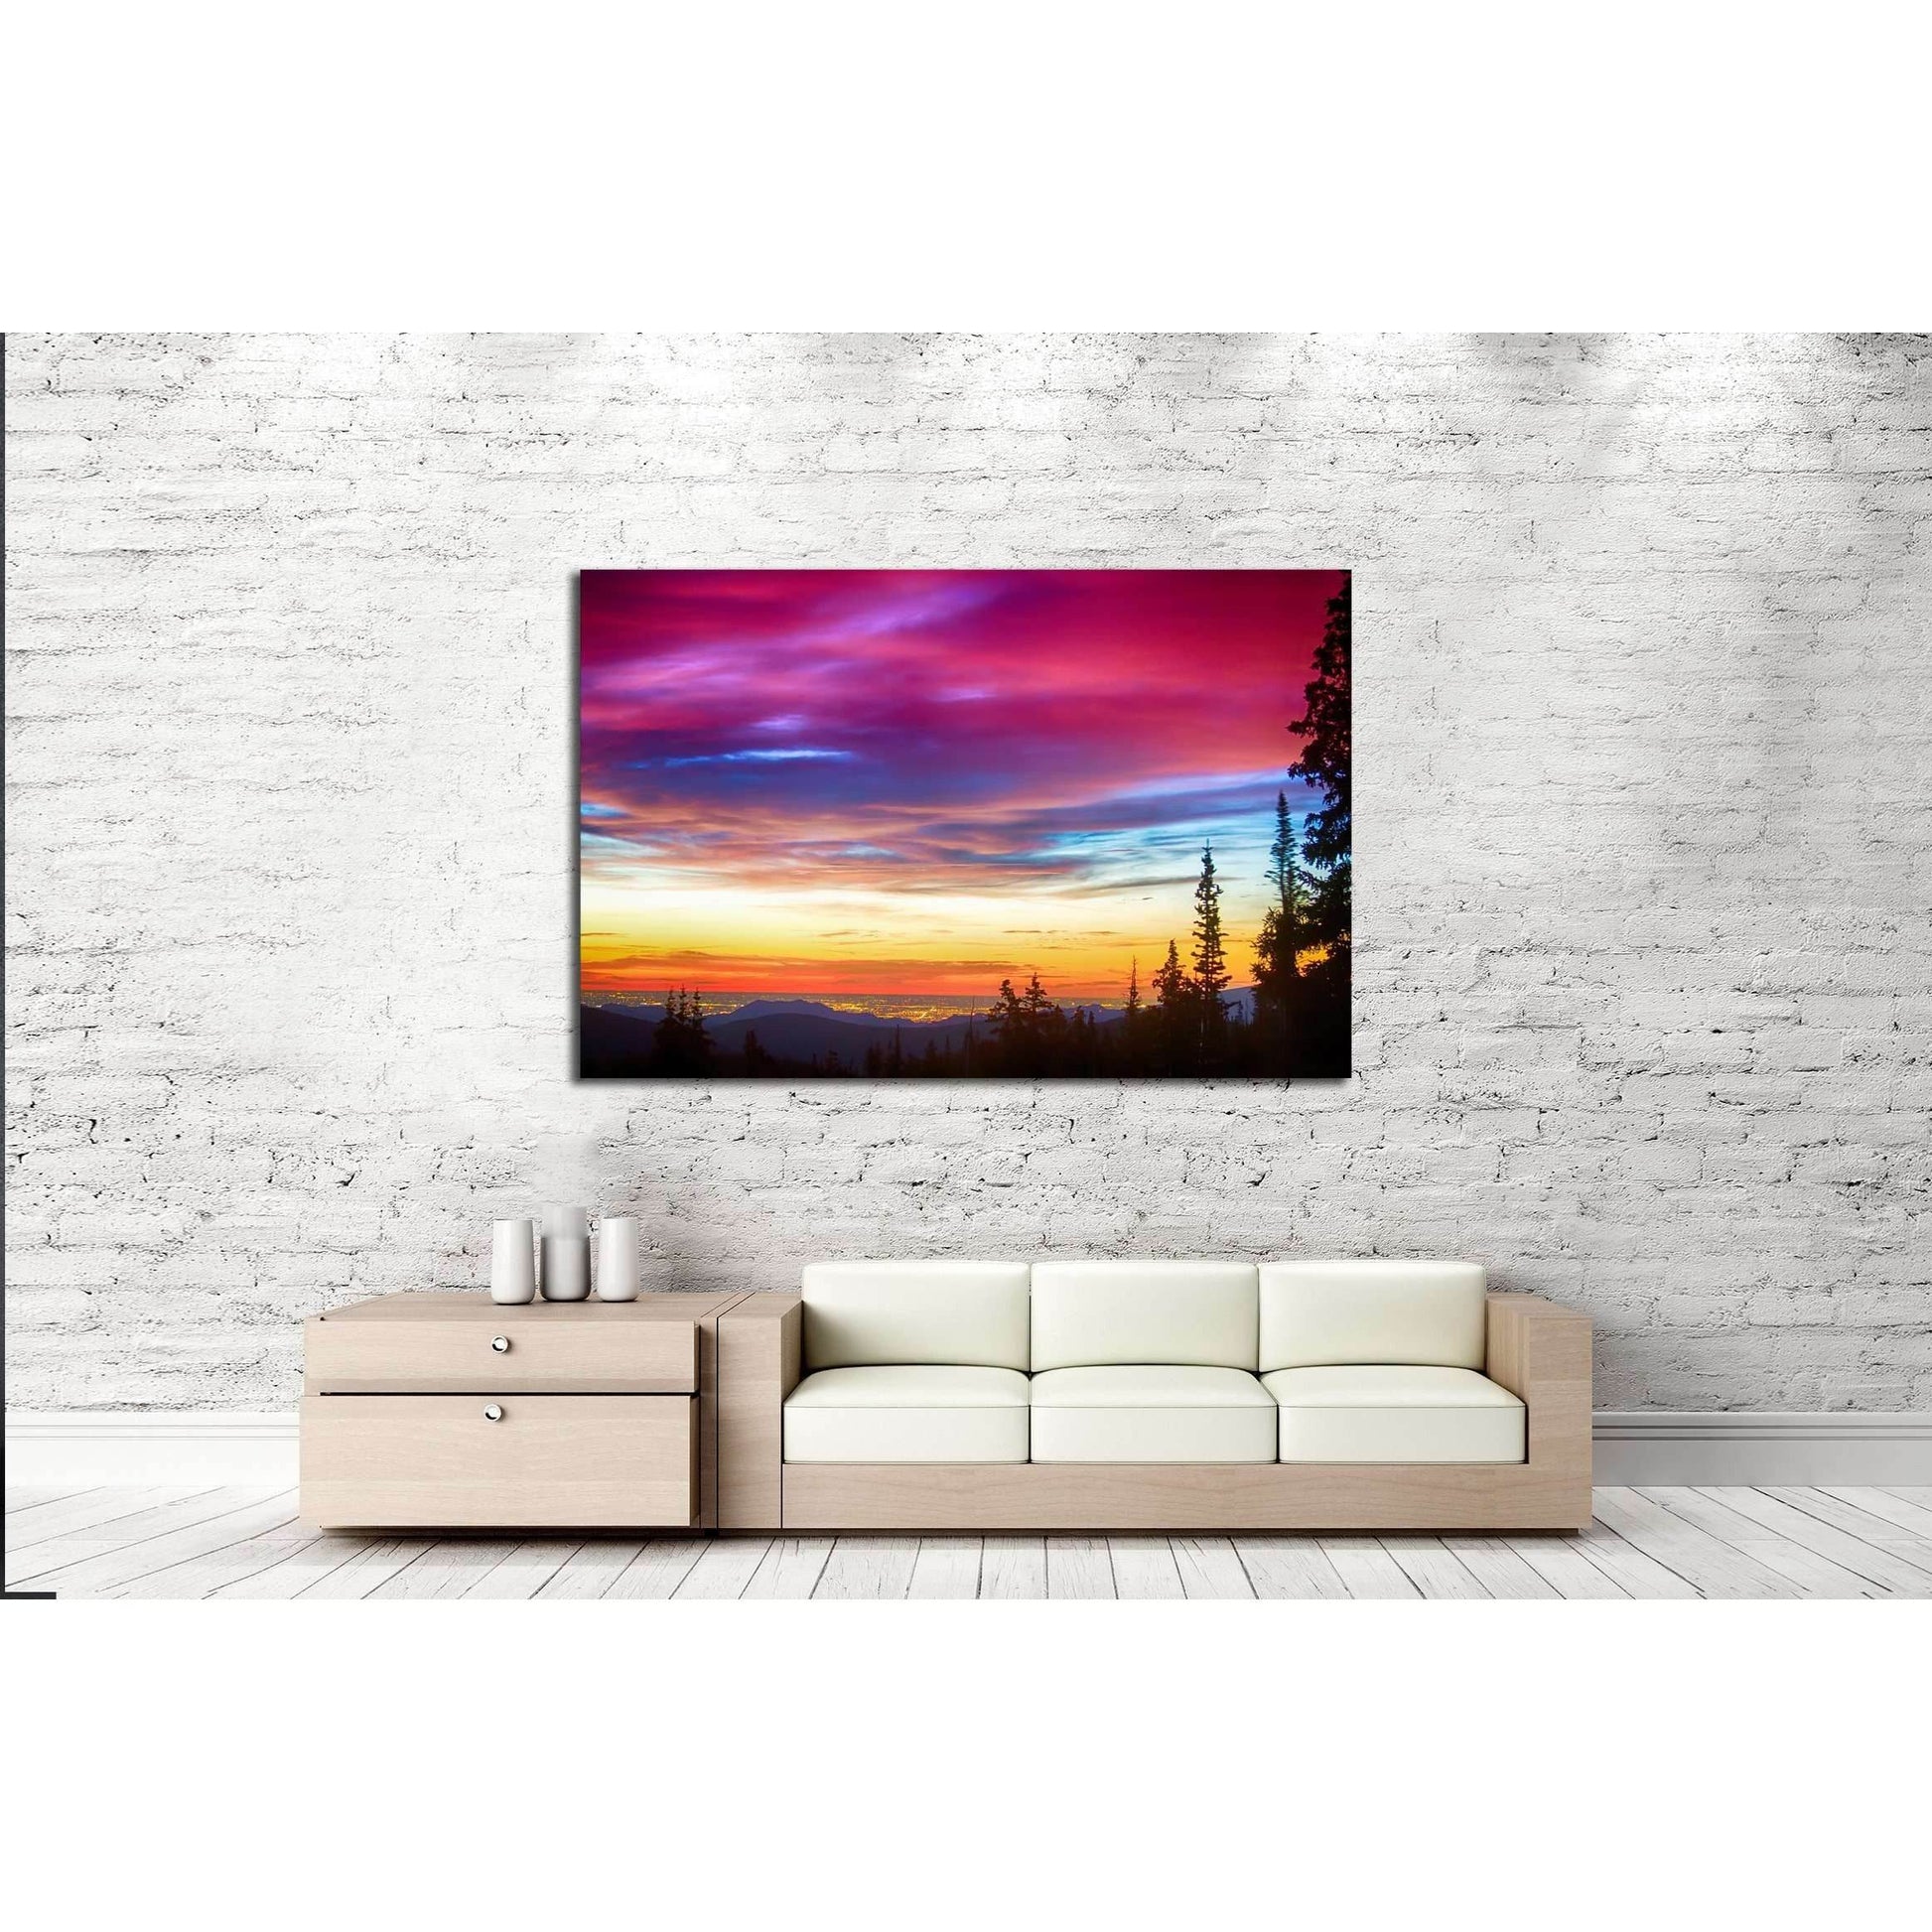 Colorful Sky and Forest Landscape Wall Art for Modern DecorThis canvas print features a stunning sunset with a vibrant palette of colors stretching across the sky, silhouetting a tranquil forest landscape. It brings a dynamic and colorful touch to any spa